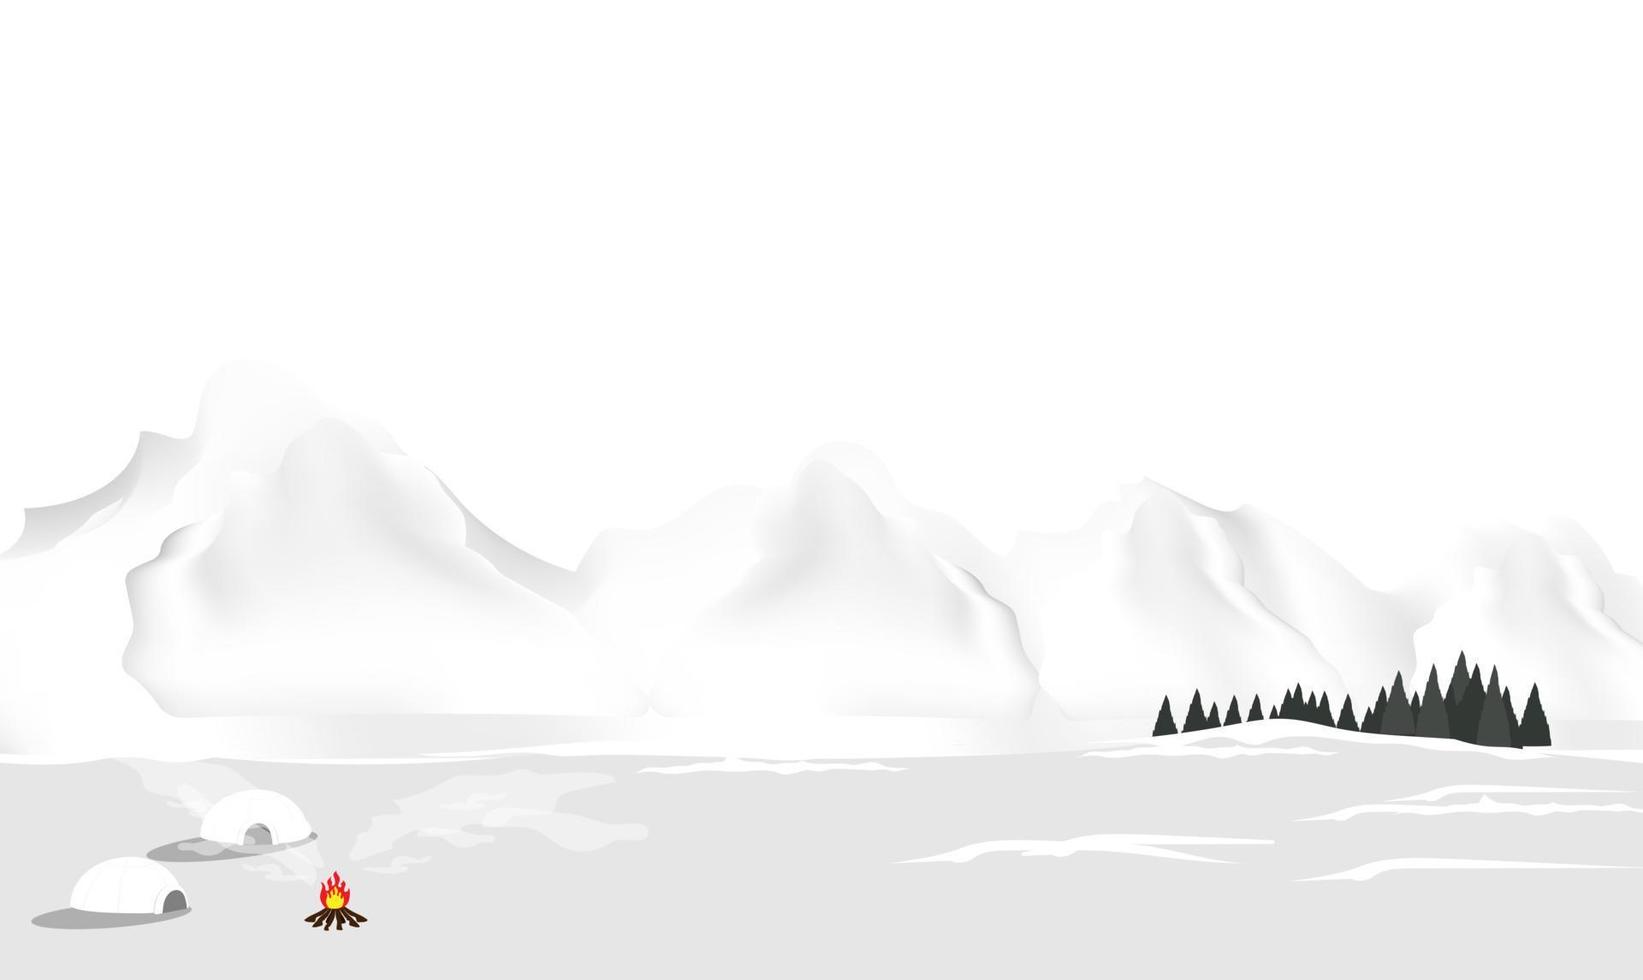 beautiful scenery in snowy on north pole illustration, abstract background, snowy day vector